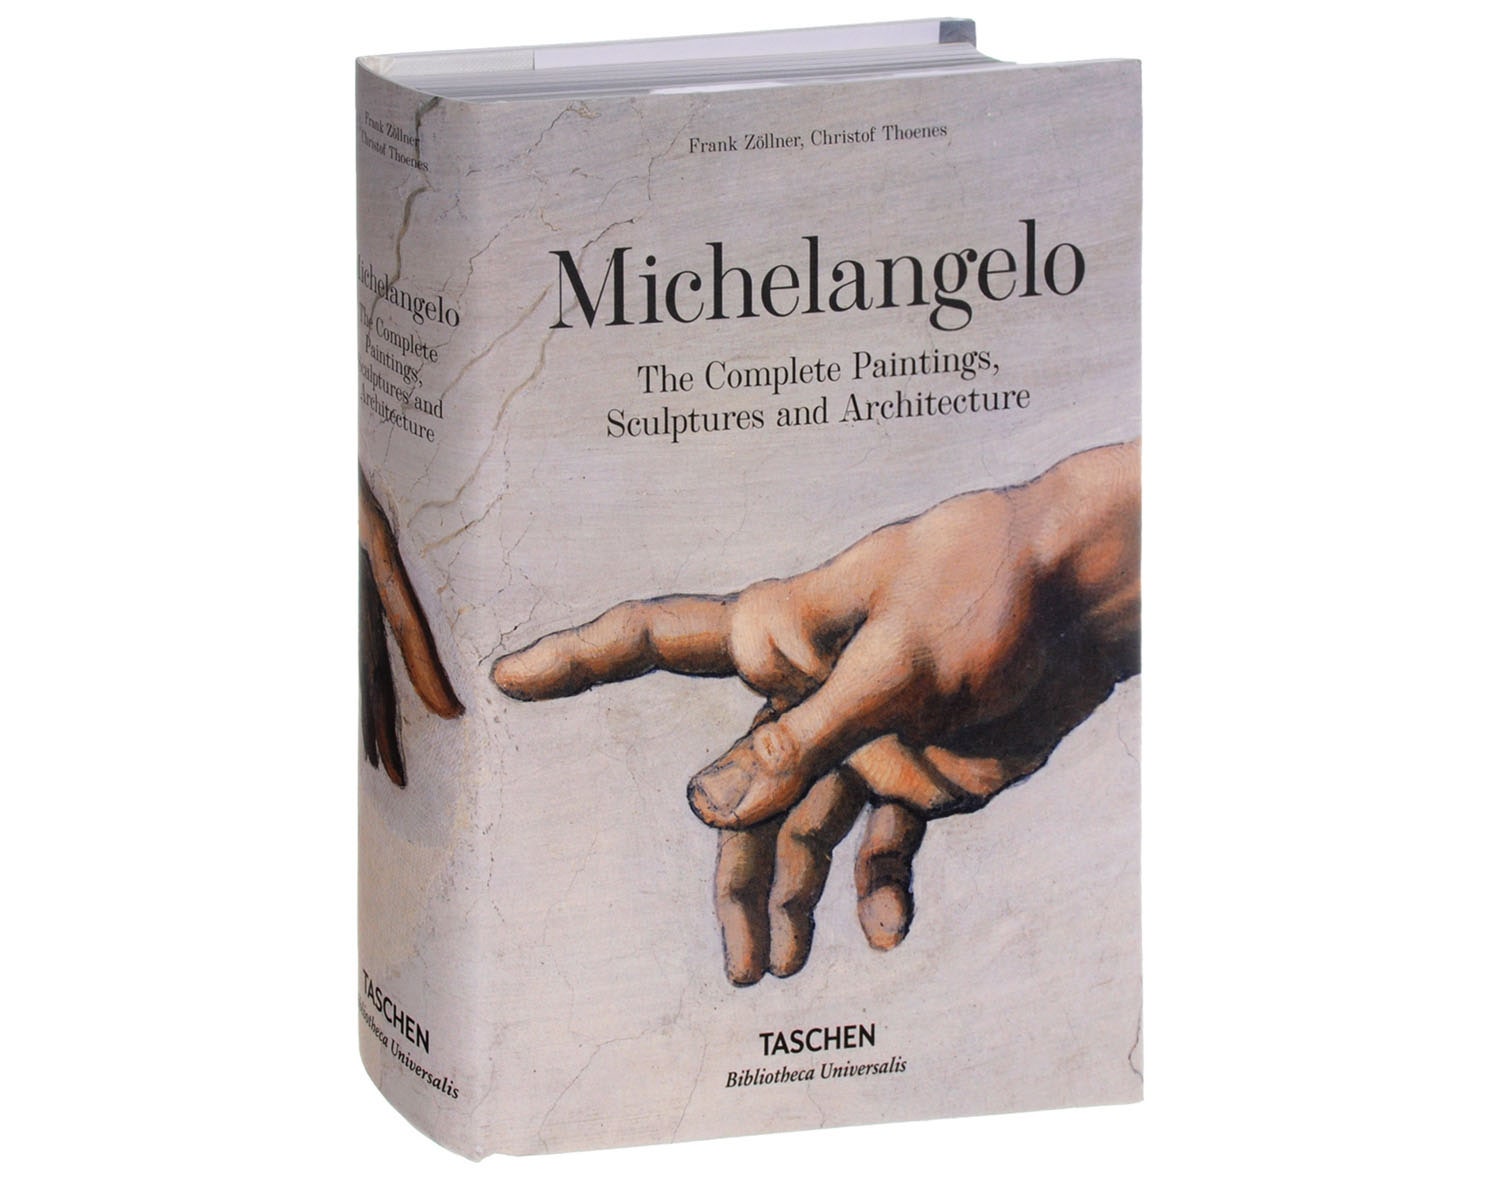 Michelangelo The Complete Paintings Sculptures and Architecture Frank Zöllner Christof Thoenes